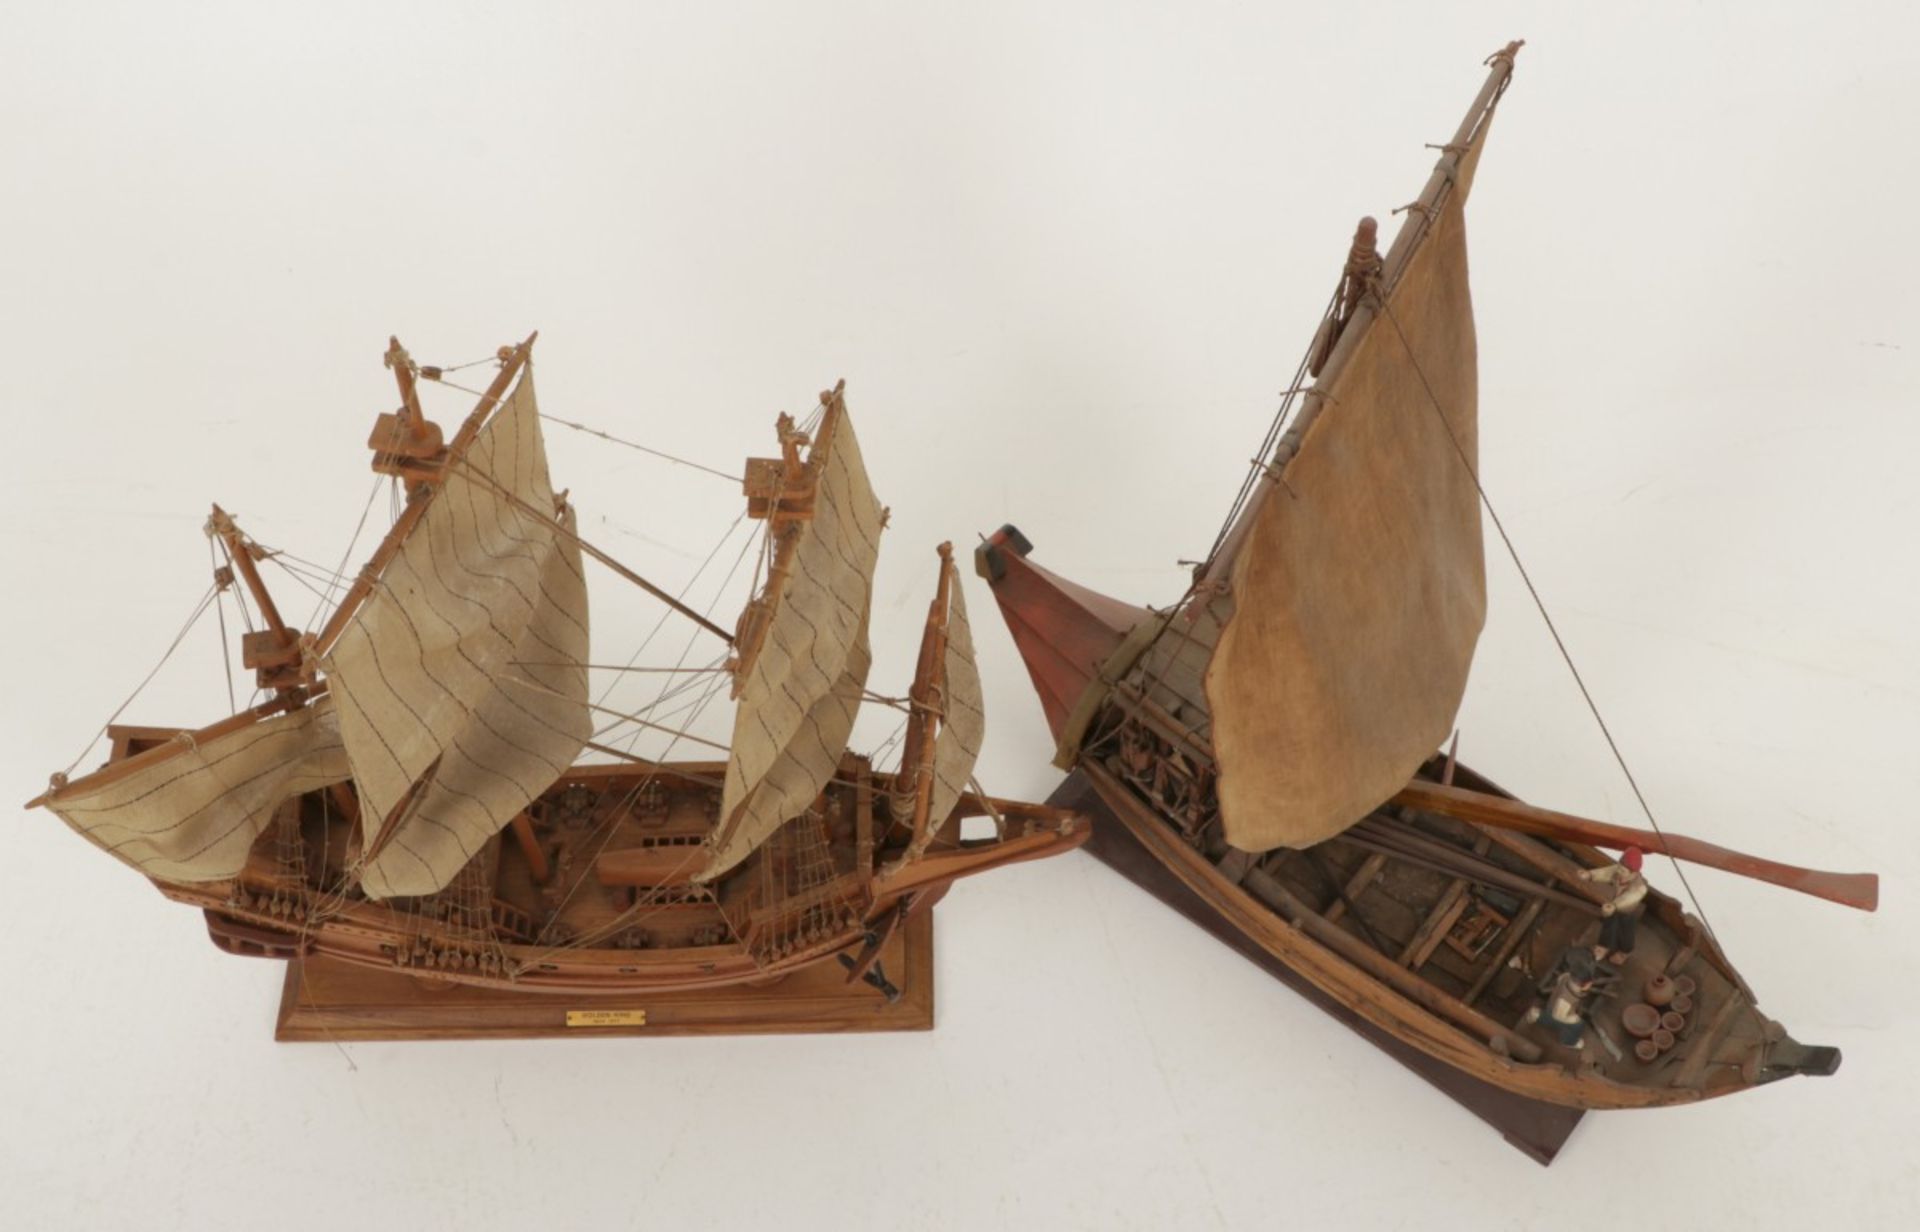 A model ship "The Gold Hind", England, together with another model ship, 20th century. - Image 2 of 2